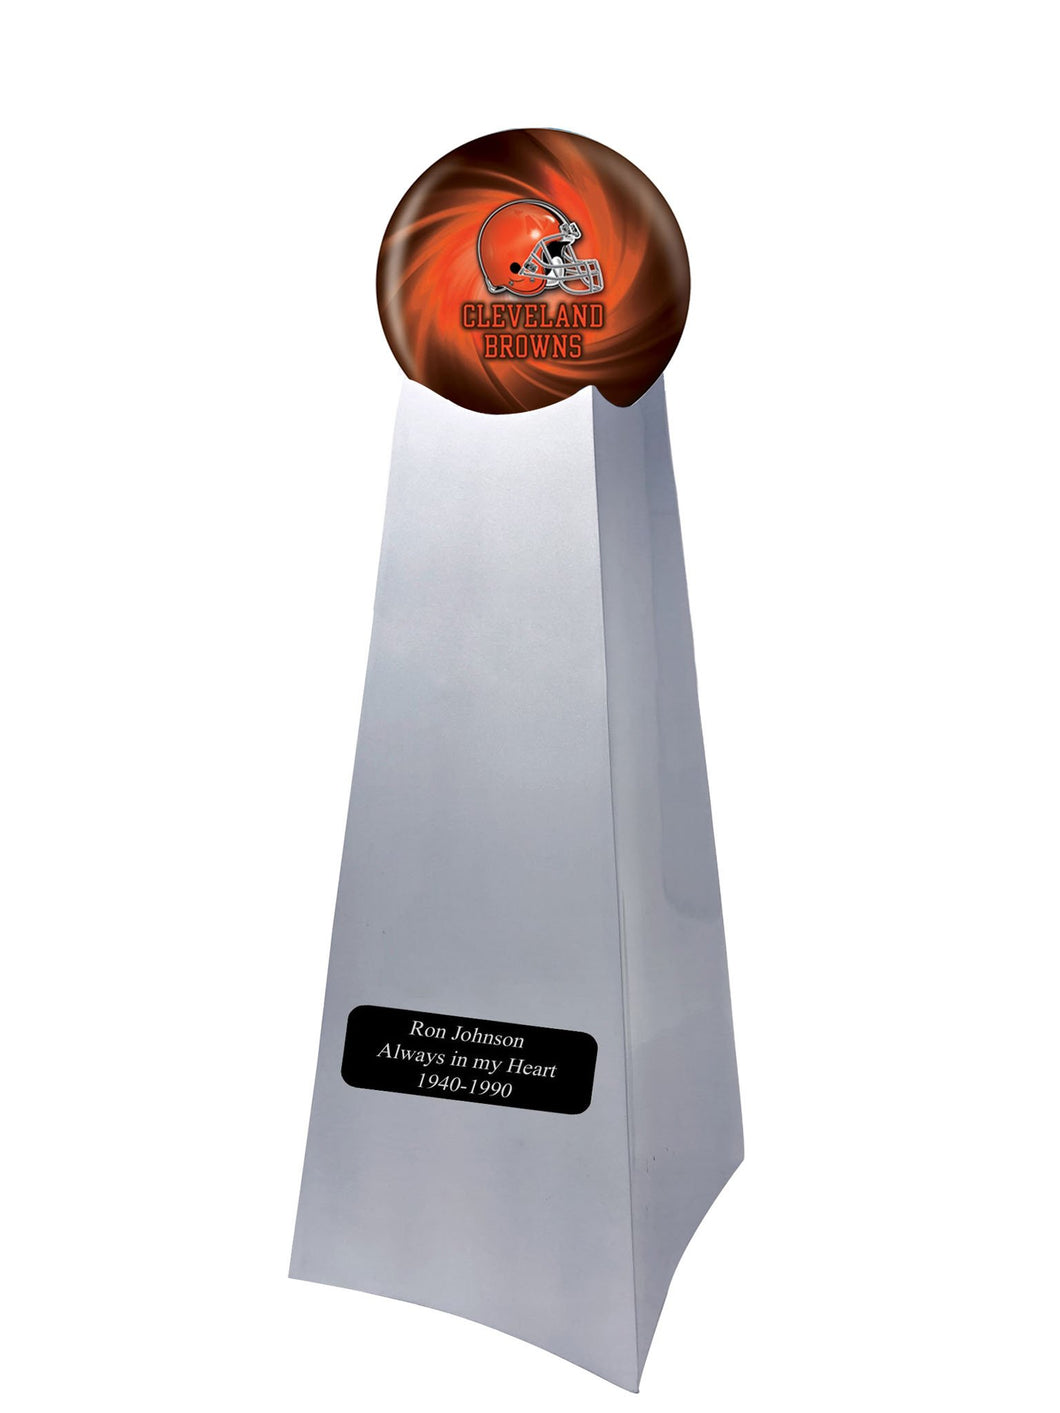 Cleveland Browns Football Championship Trophy Large/Adult Cremation Urn 200 Cubic Inches